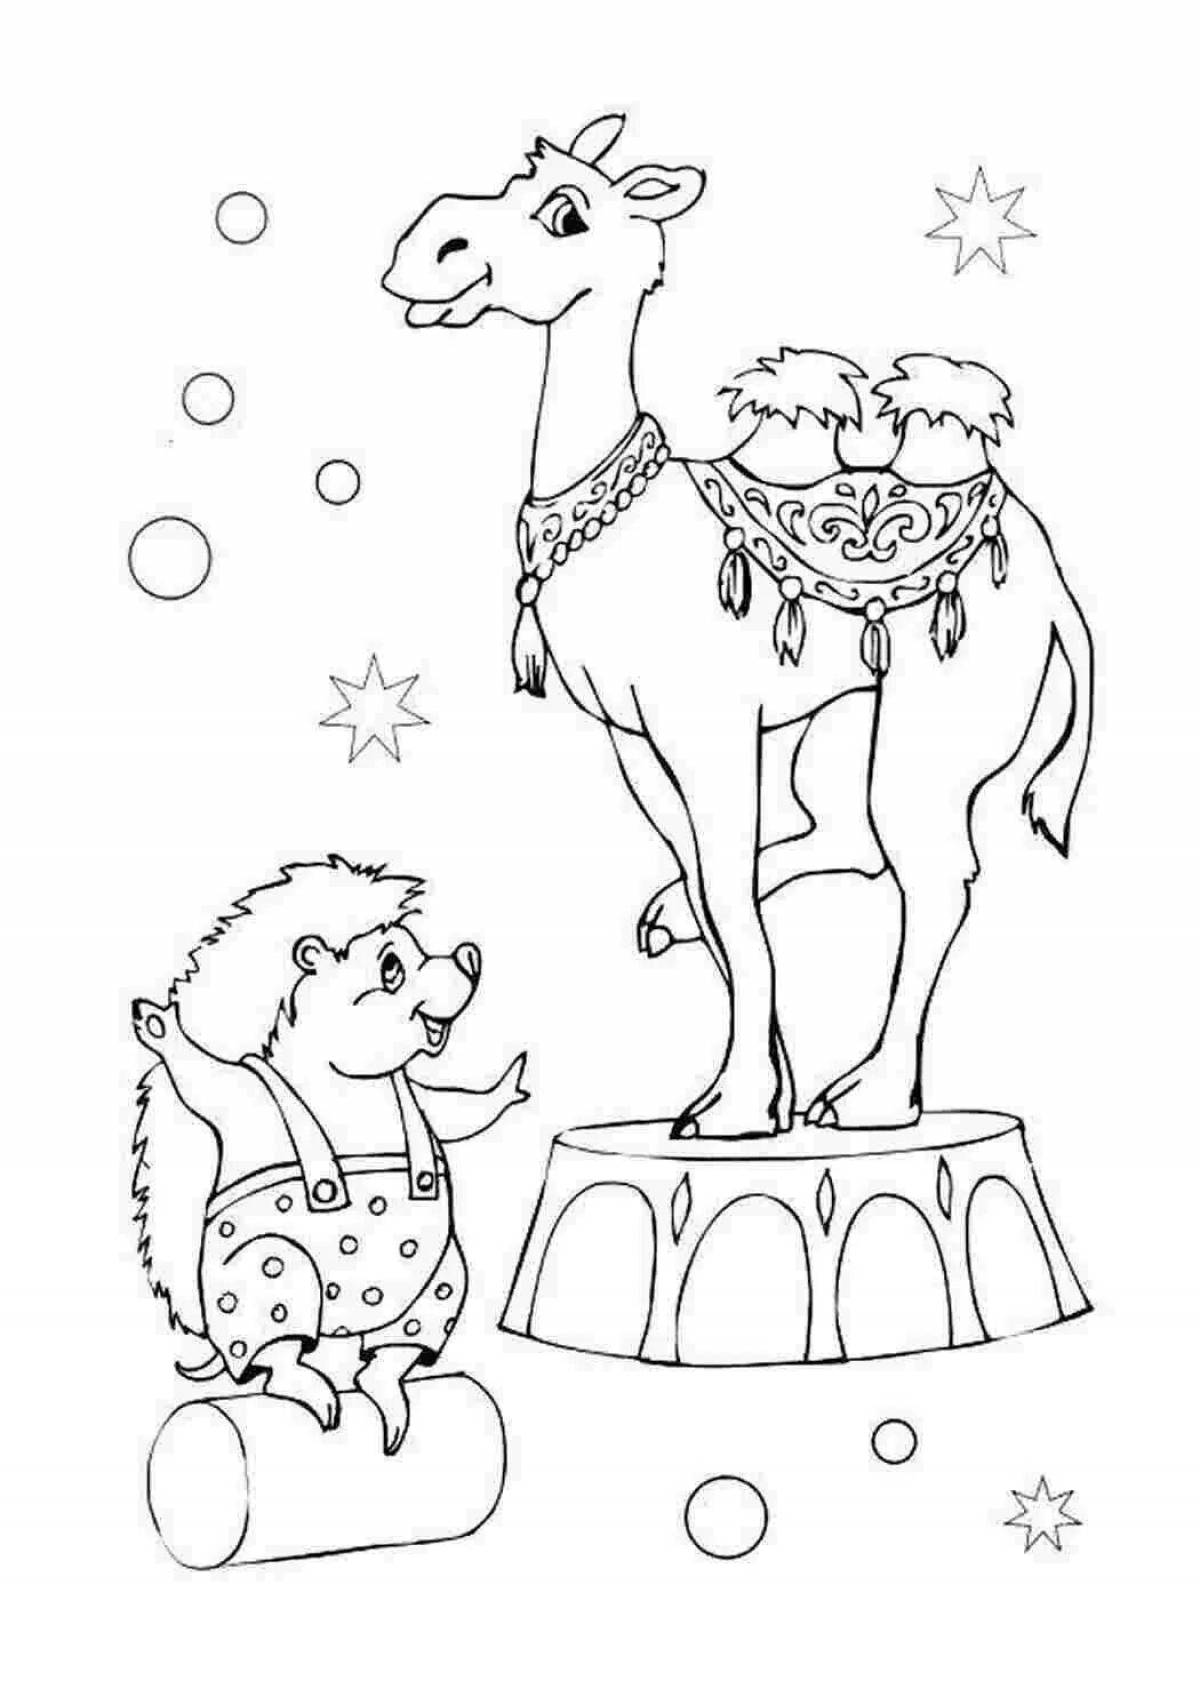 Exciting circus coloring book for kids